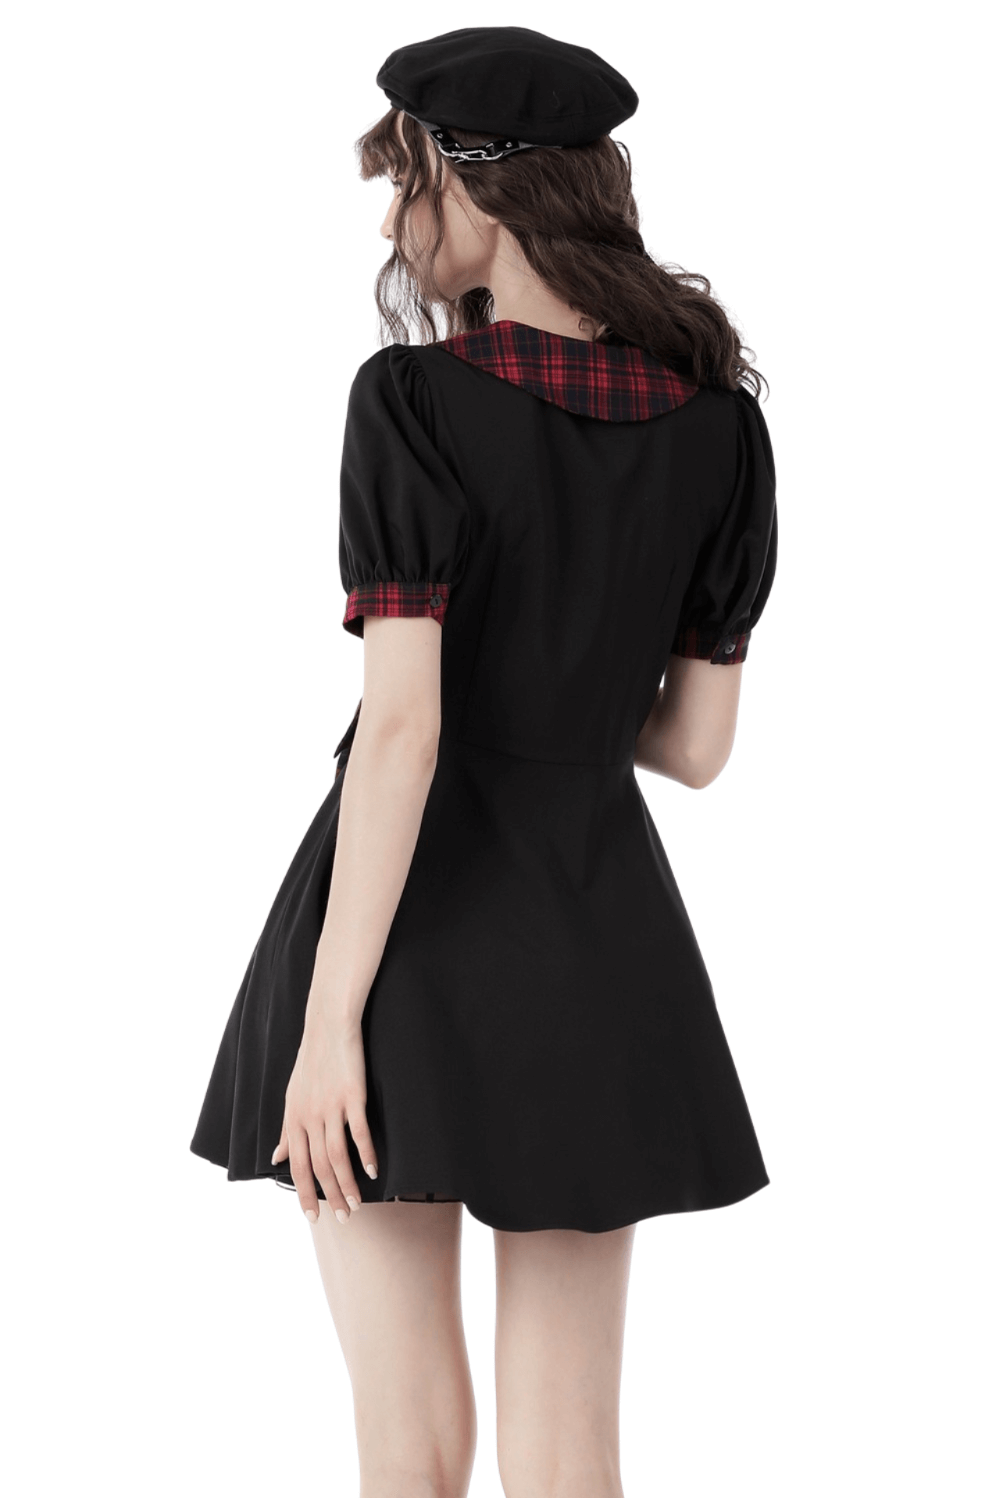 Trendy Black Dress with Plaid Accents and Bow Detail